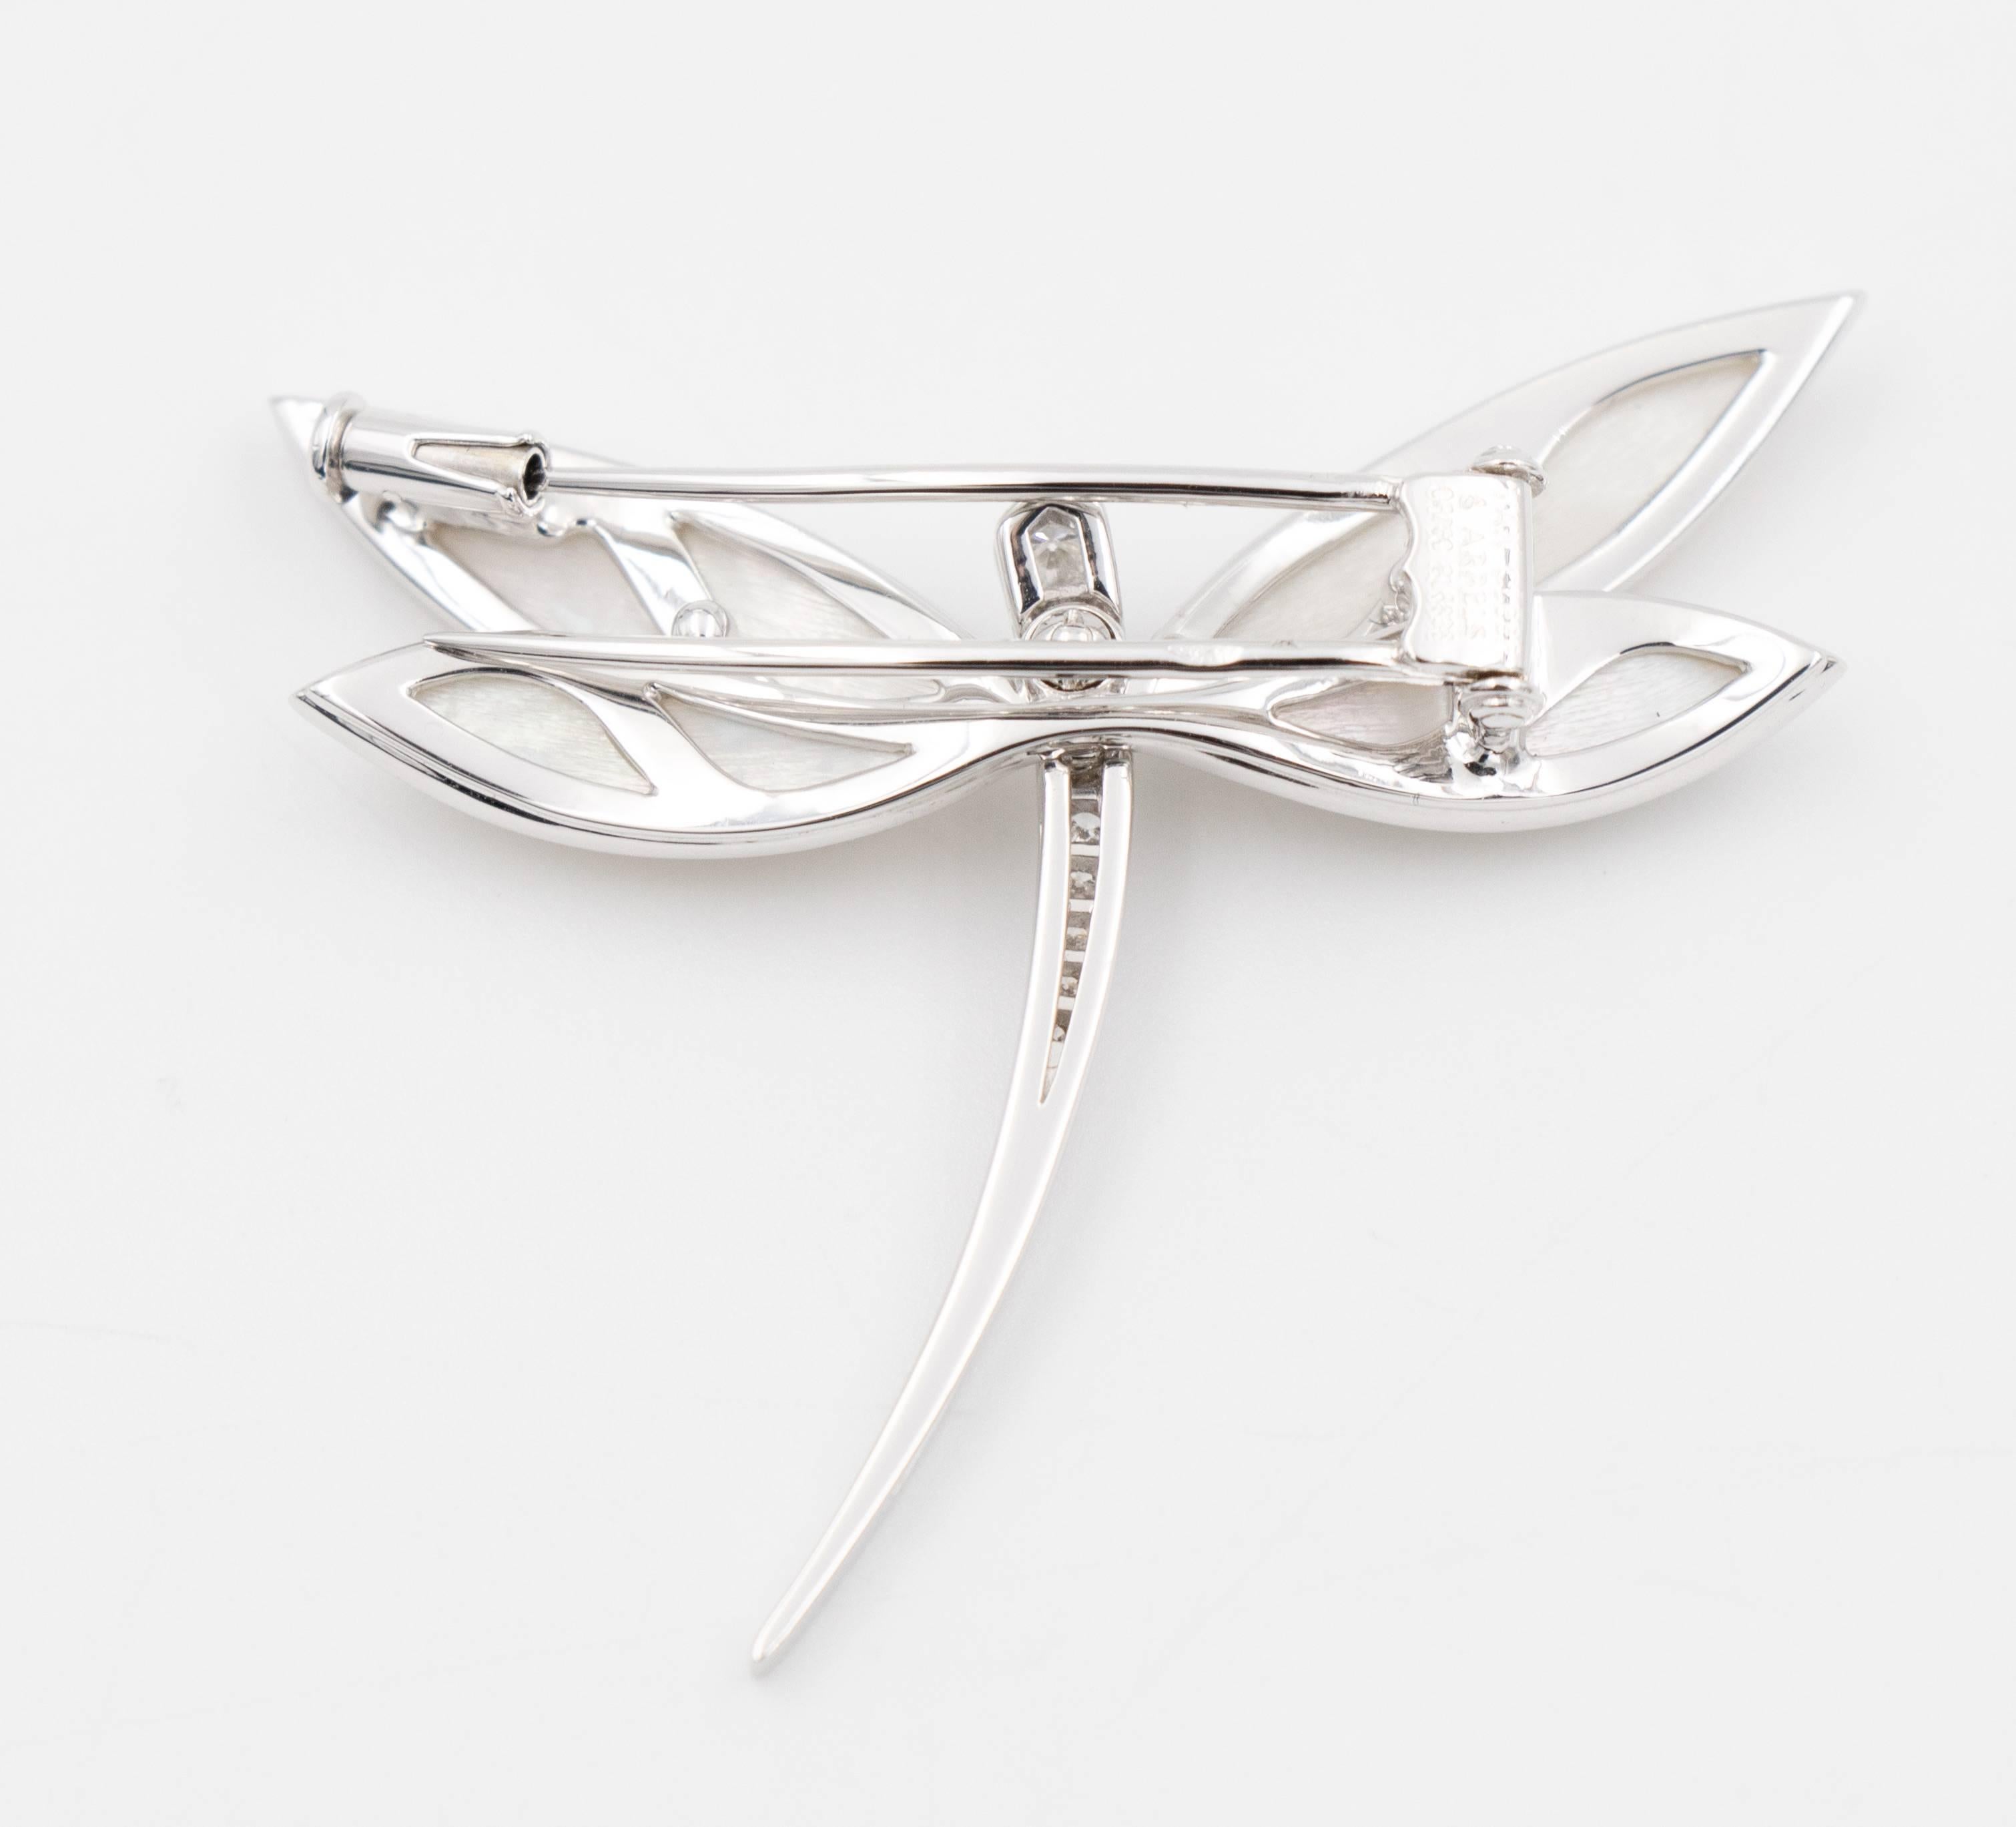 Round Cut Van Cleef & Arpels Dragonfly Diamond Brooch, 18k White Gold and Mother-of-Pearl